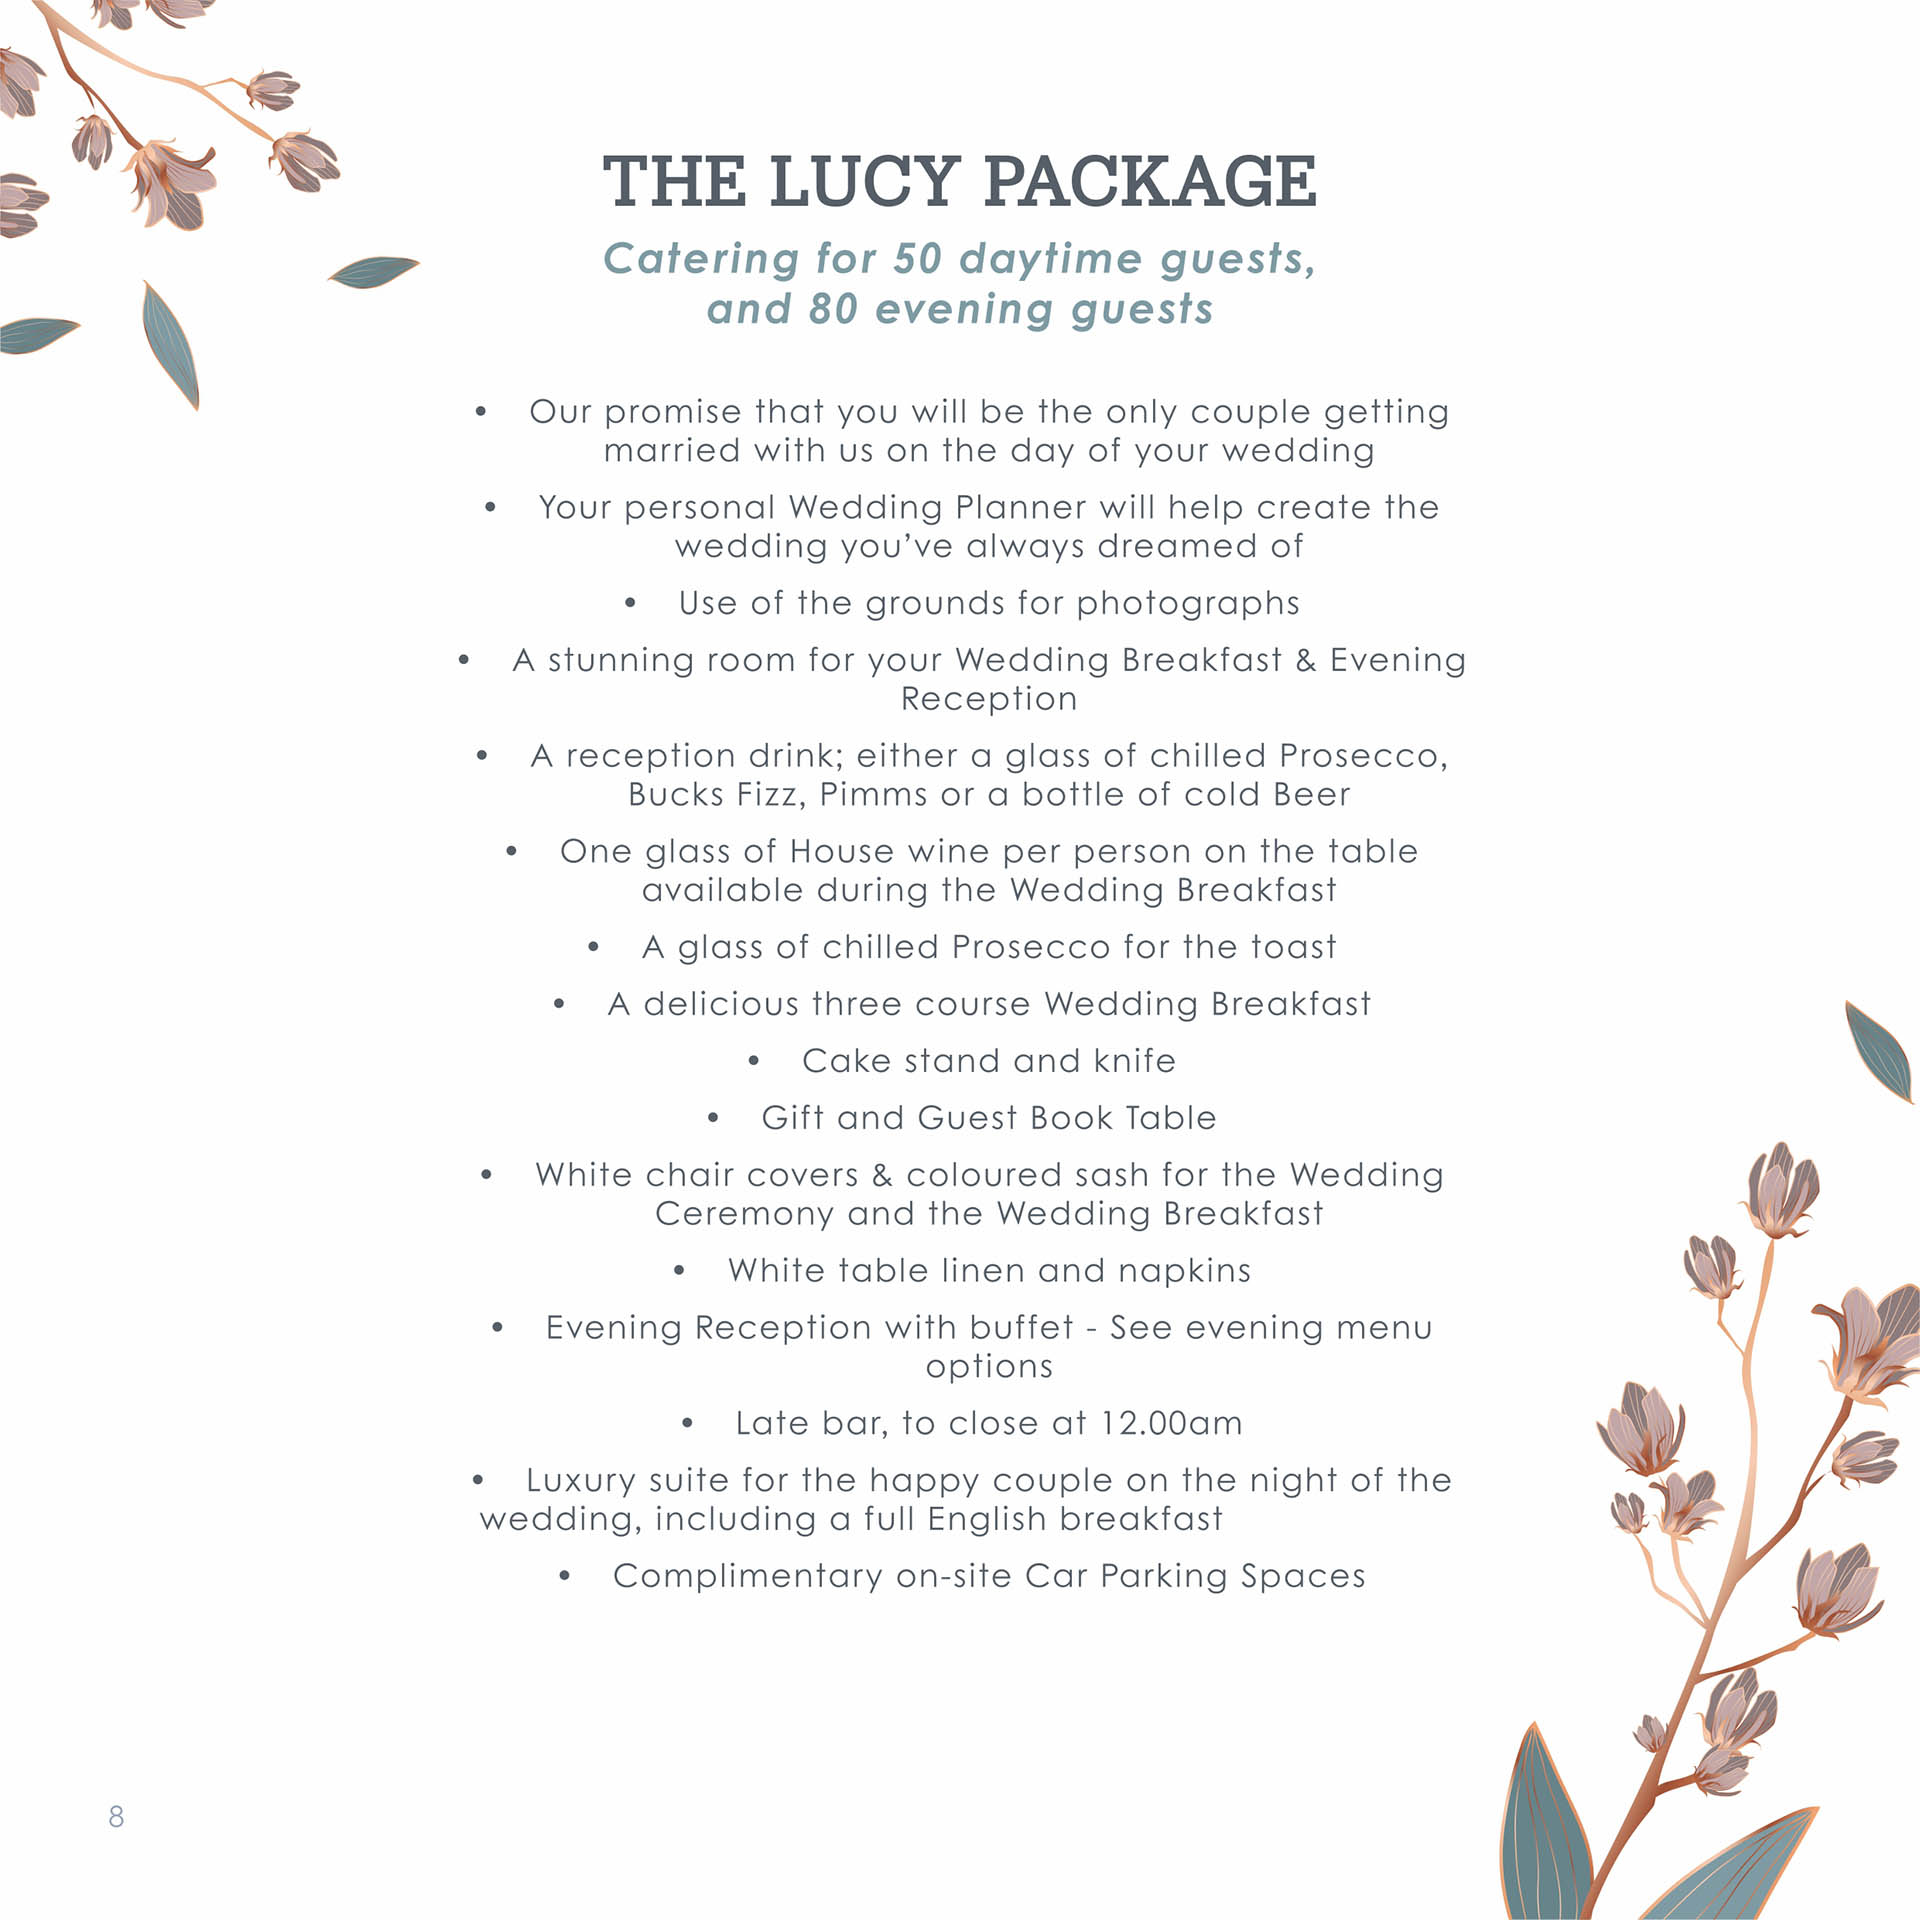 Charlecote Pheasant Hotel Stratford Upon Avon Wedding The Lucy Package